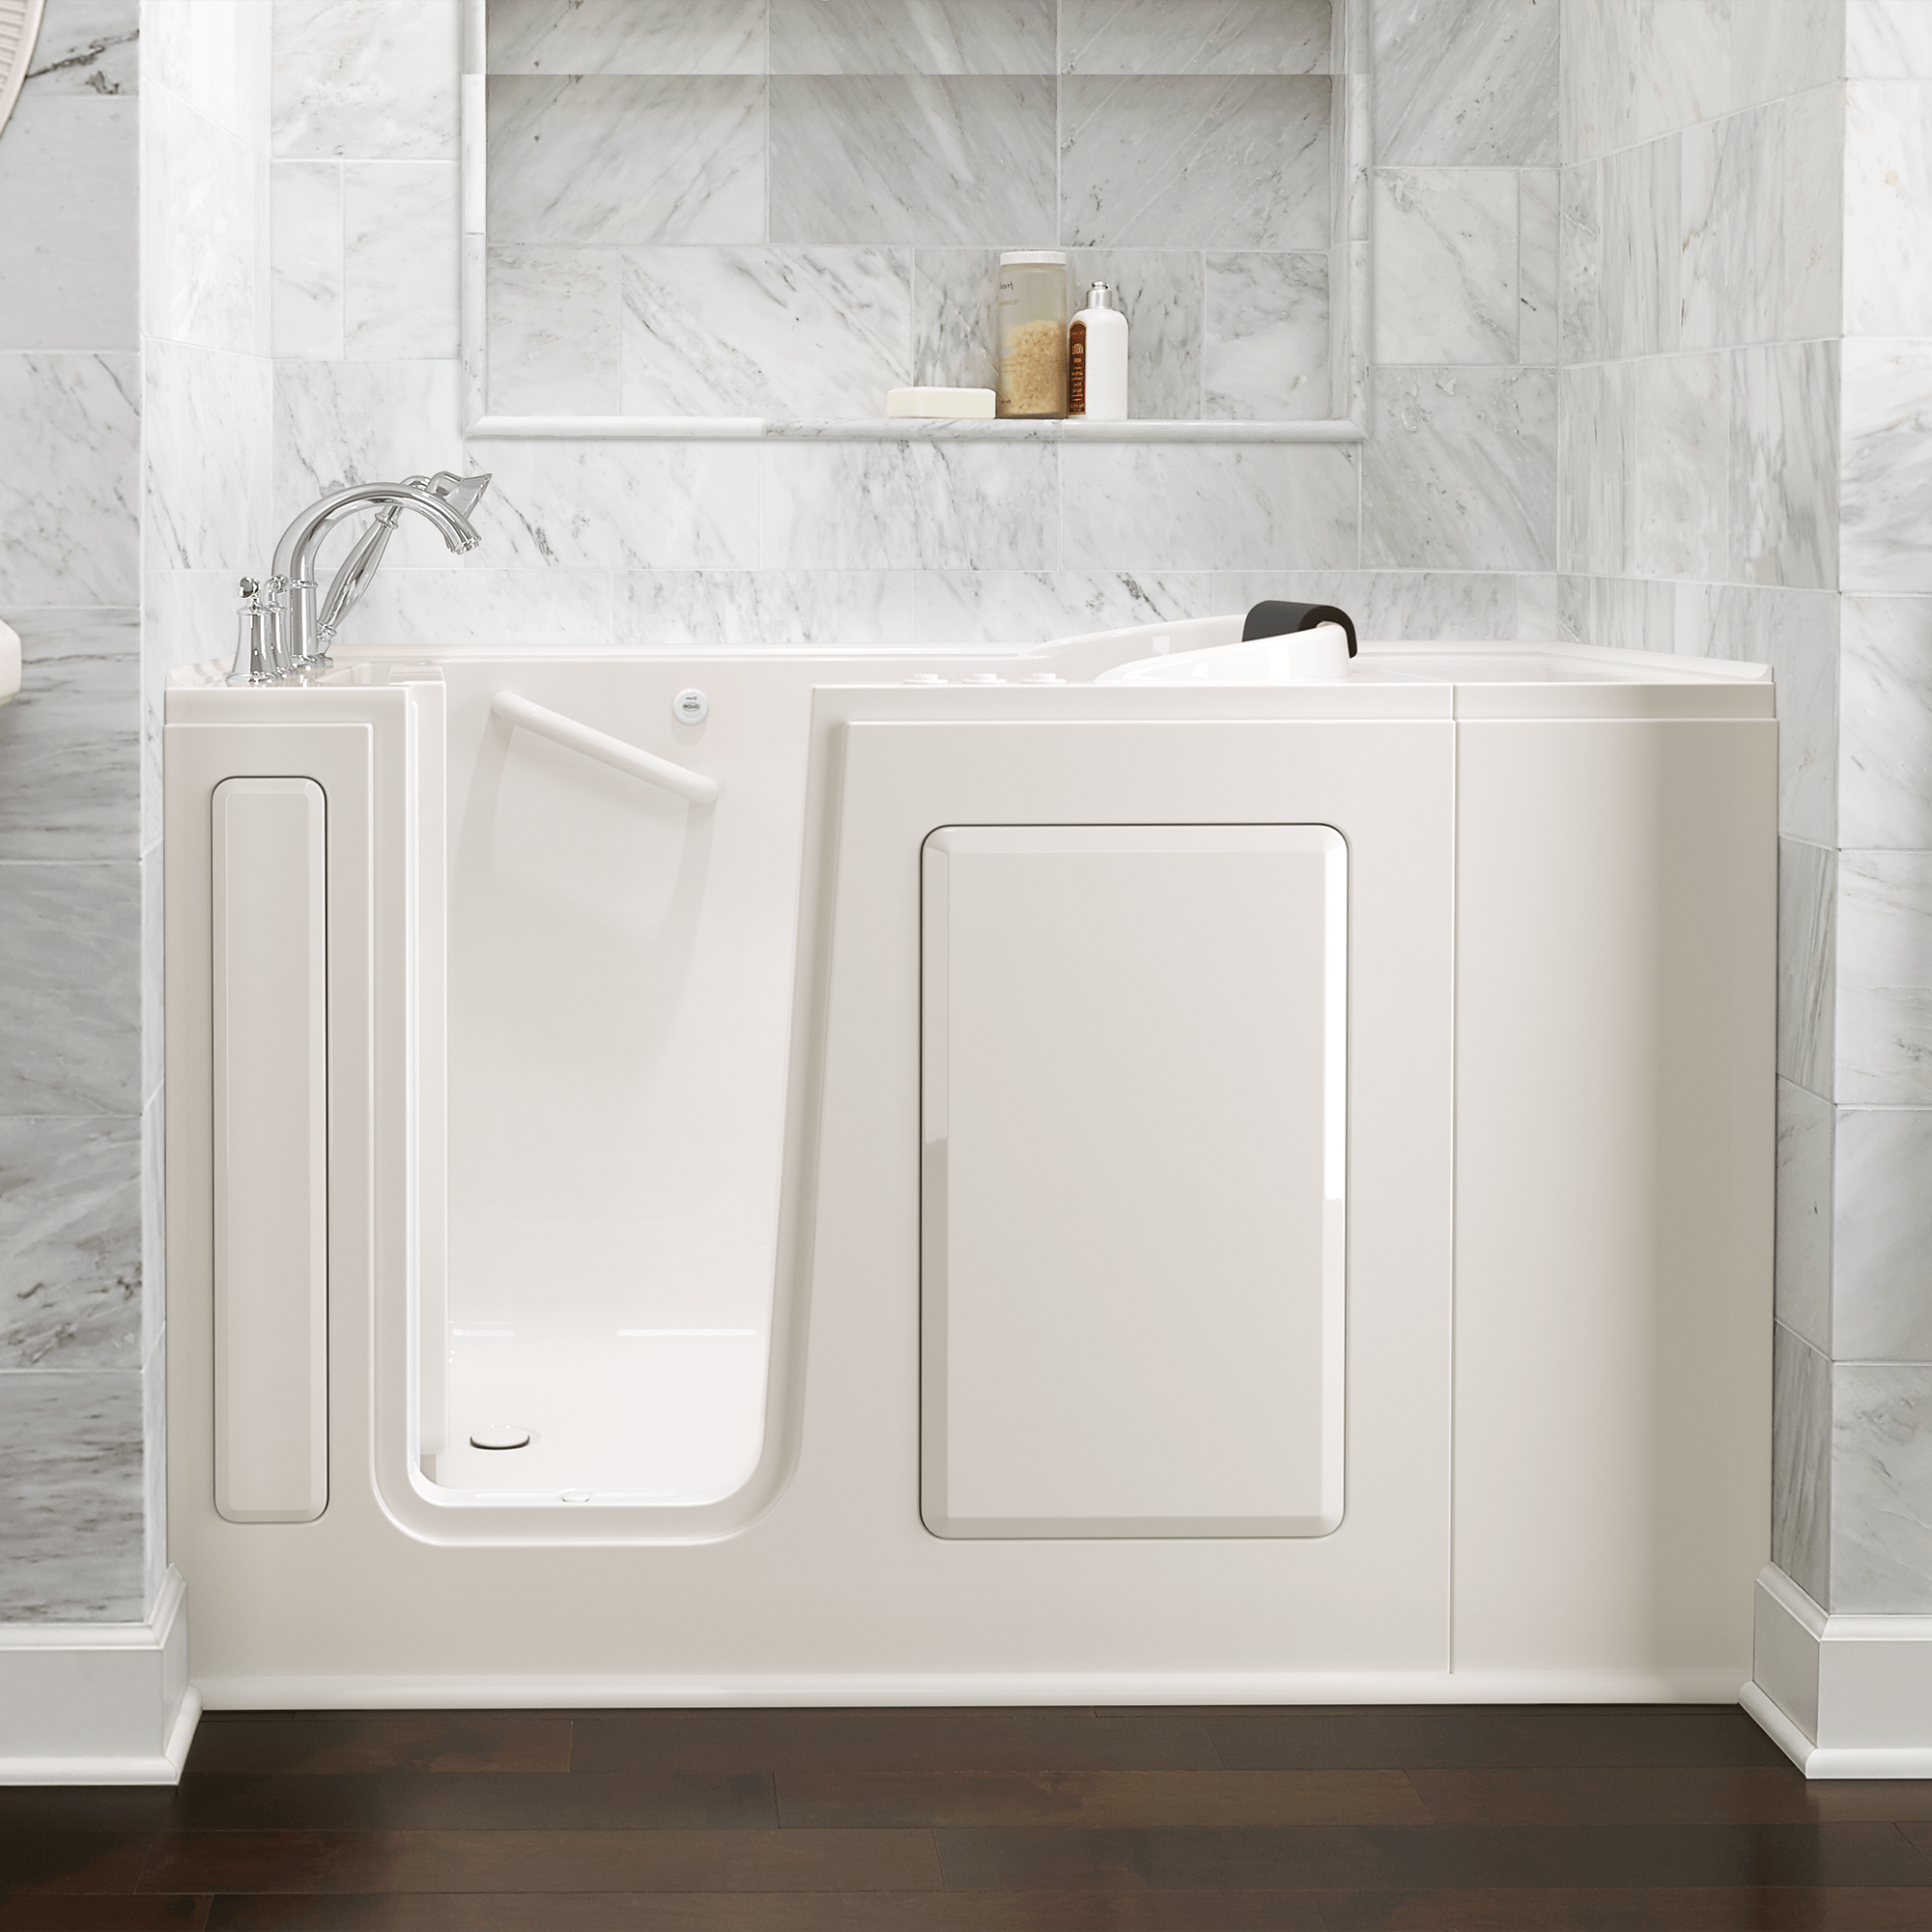 Gelcoat Premium Series 48x28 Inch Walk-In Bathtub with Dual Air Massage and Jet Massage System - Left Hand Door and Drain